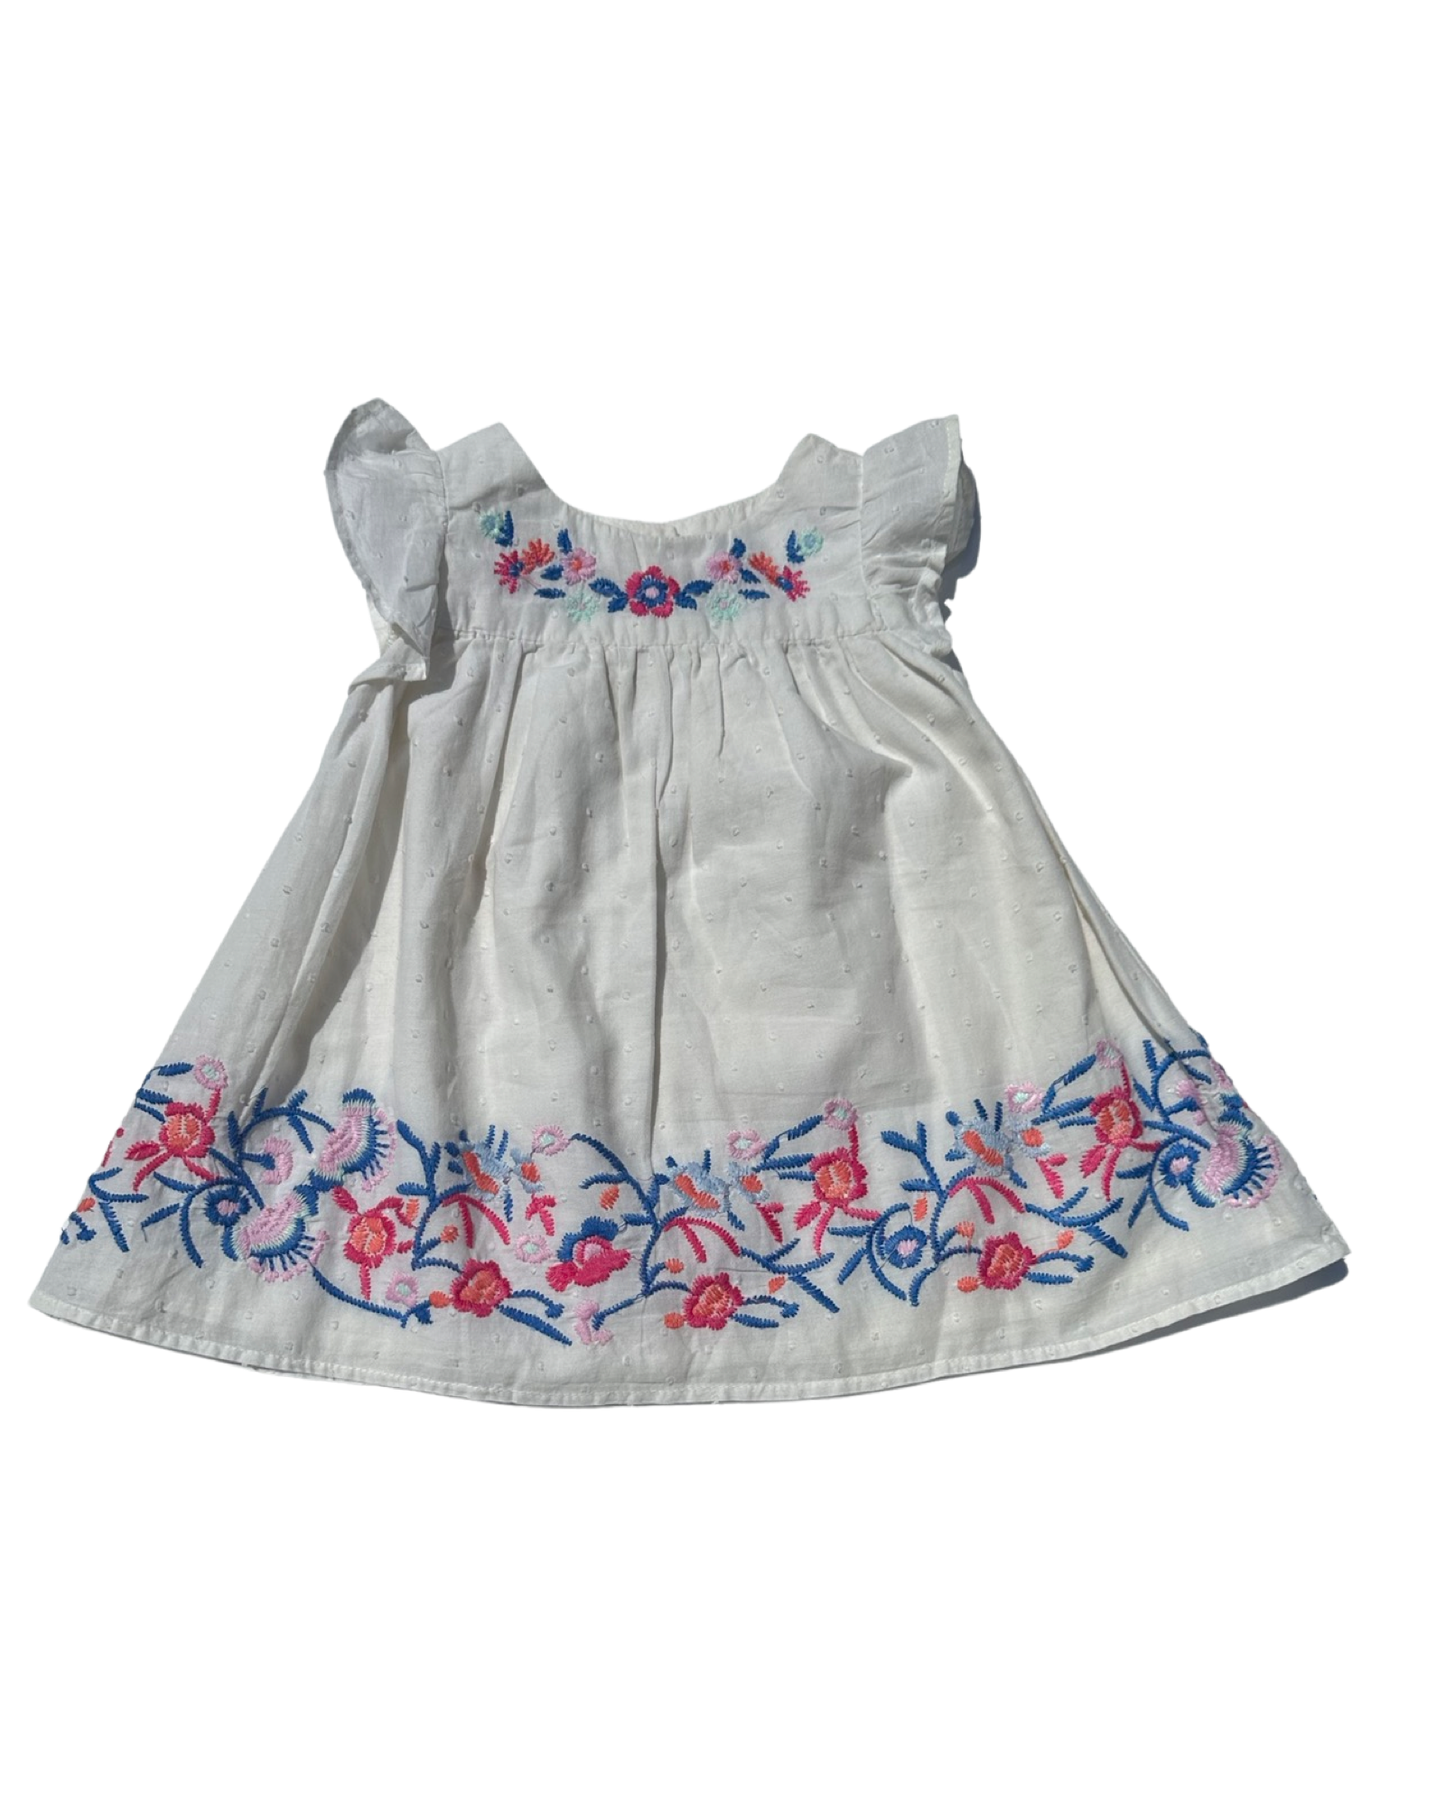 Baby Gap embroidered white cotton dress (size 3-6mths)